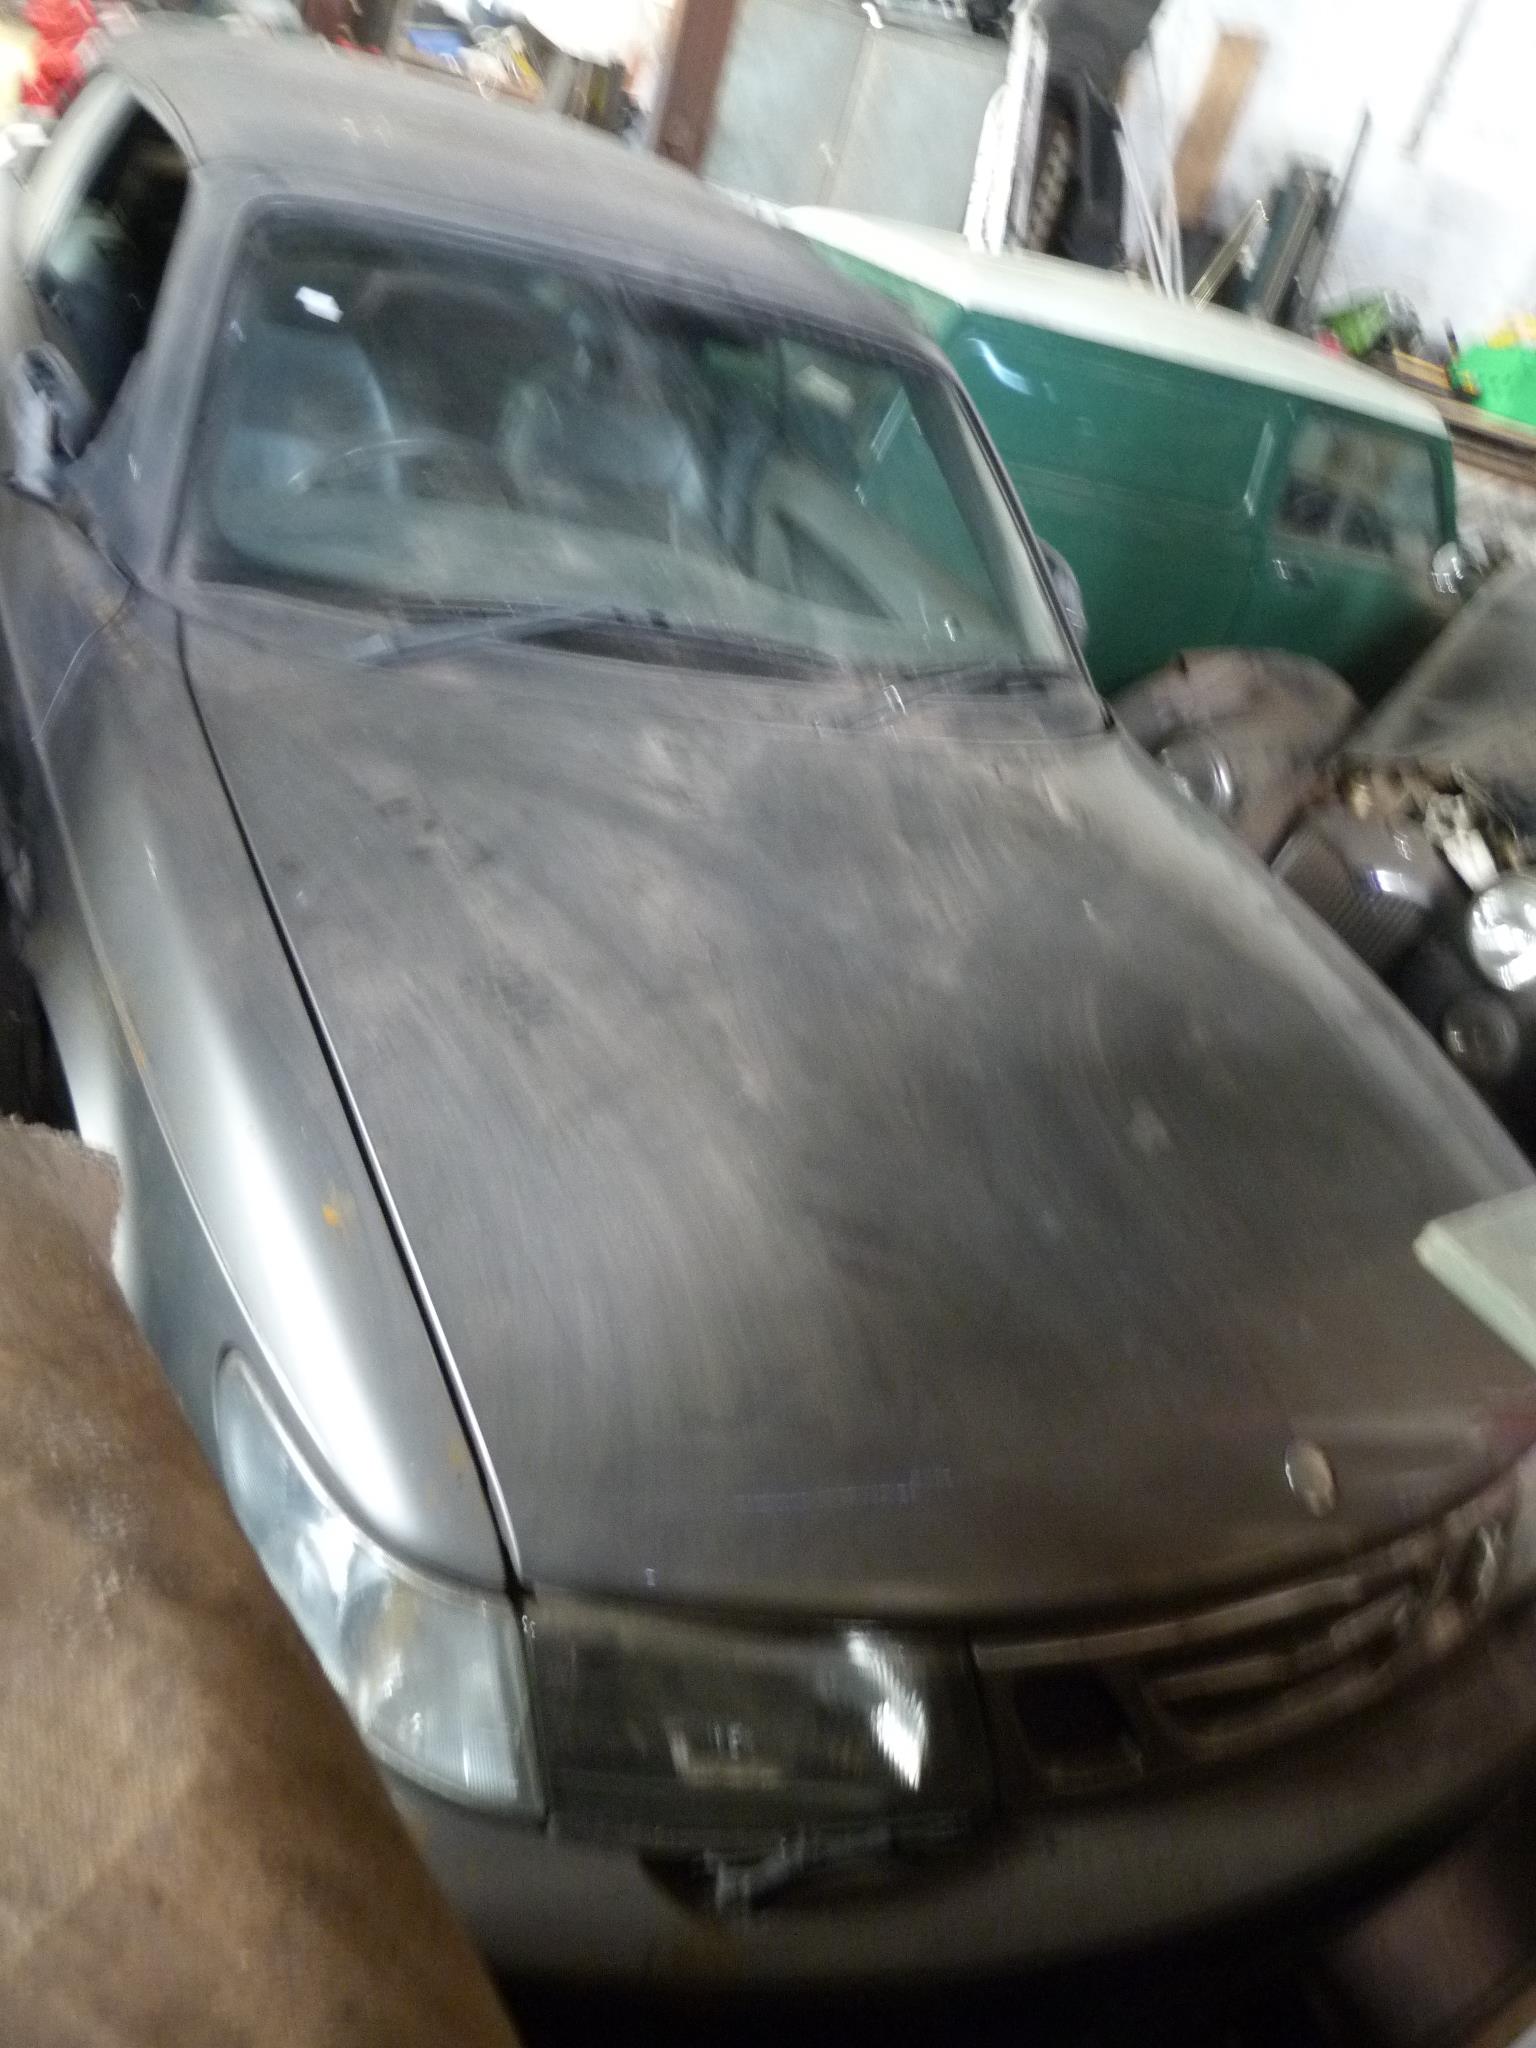 Saab 93 Convertible Mileage Approx 80,000 Full Saab Service History (Slight Offside Scrape on Wing) - Image 4 of 11